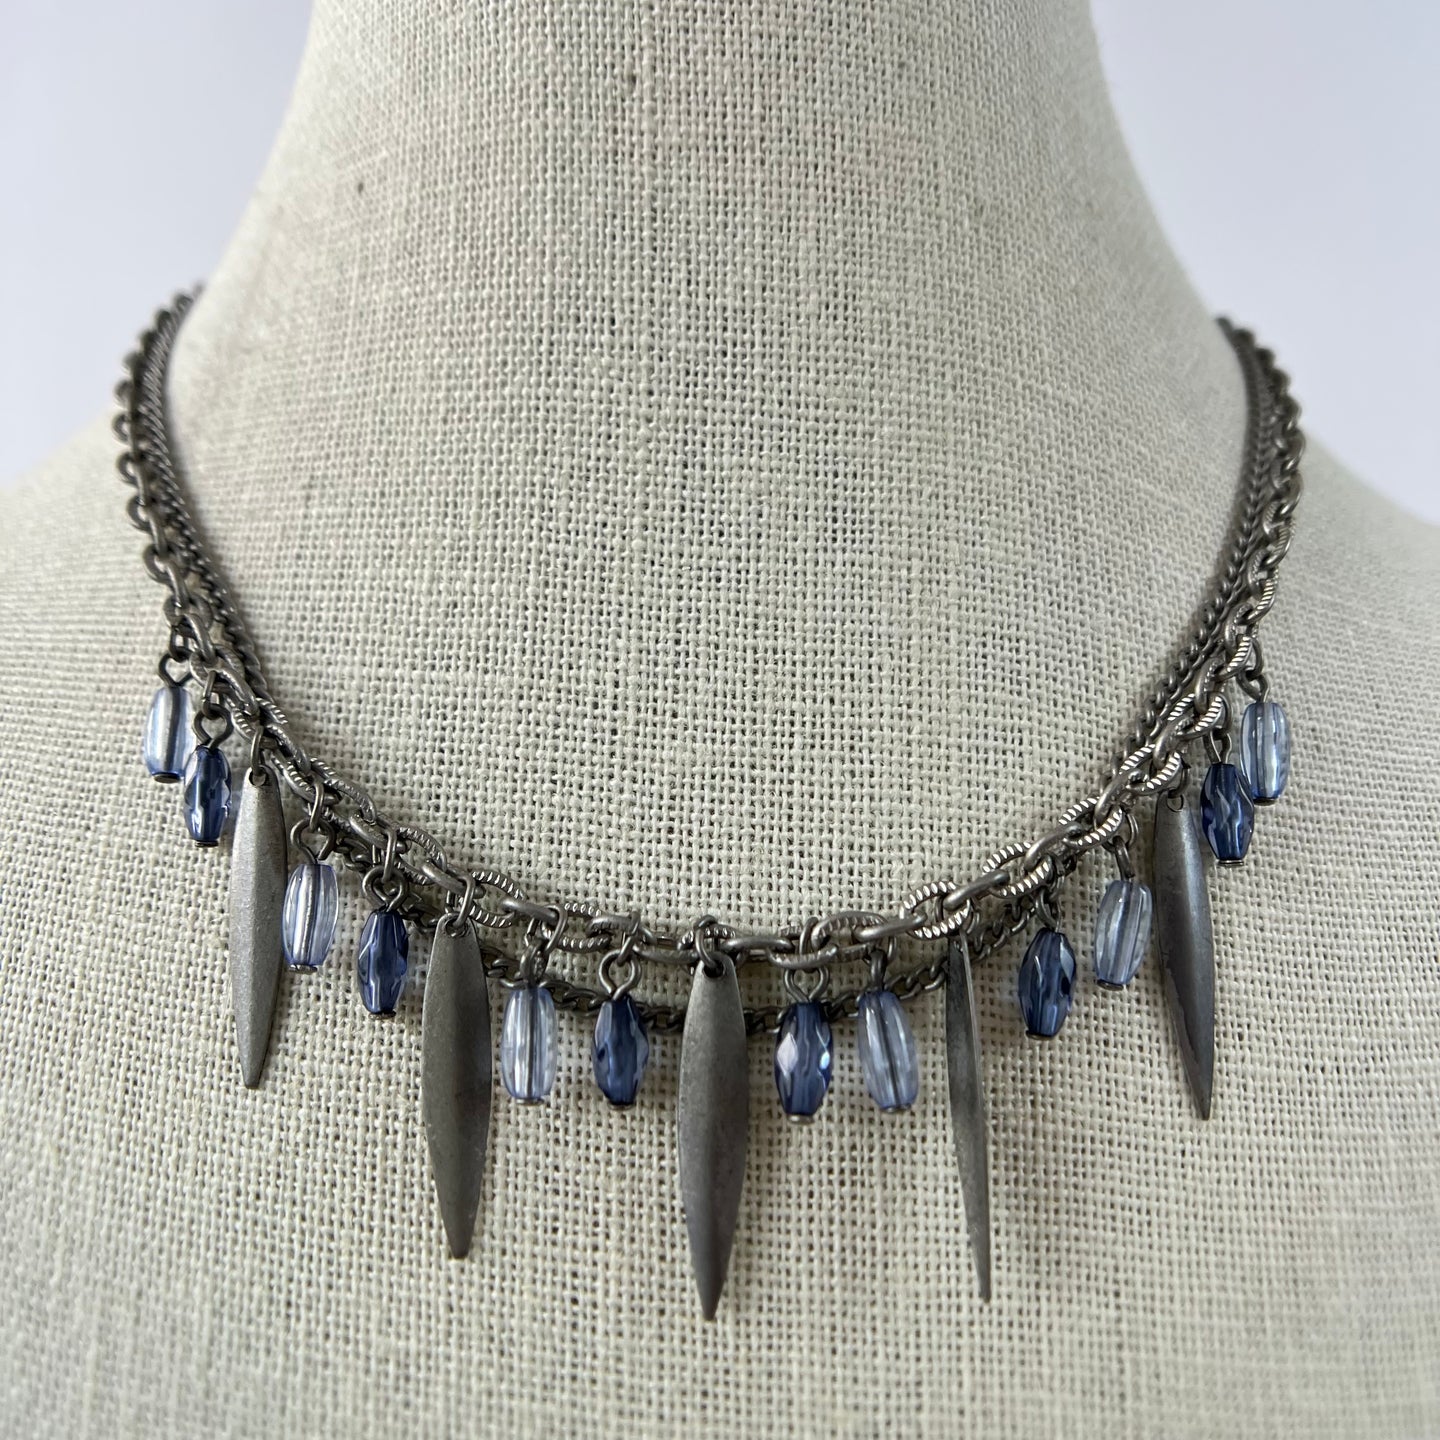 Double Strand Silver Tone Fringe Womens Necklace 19